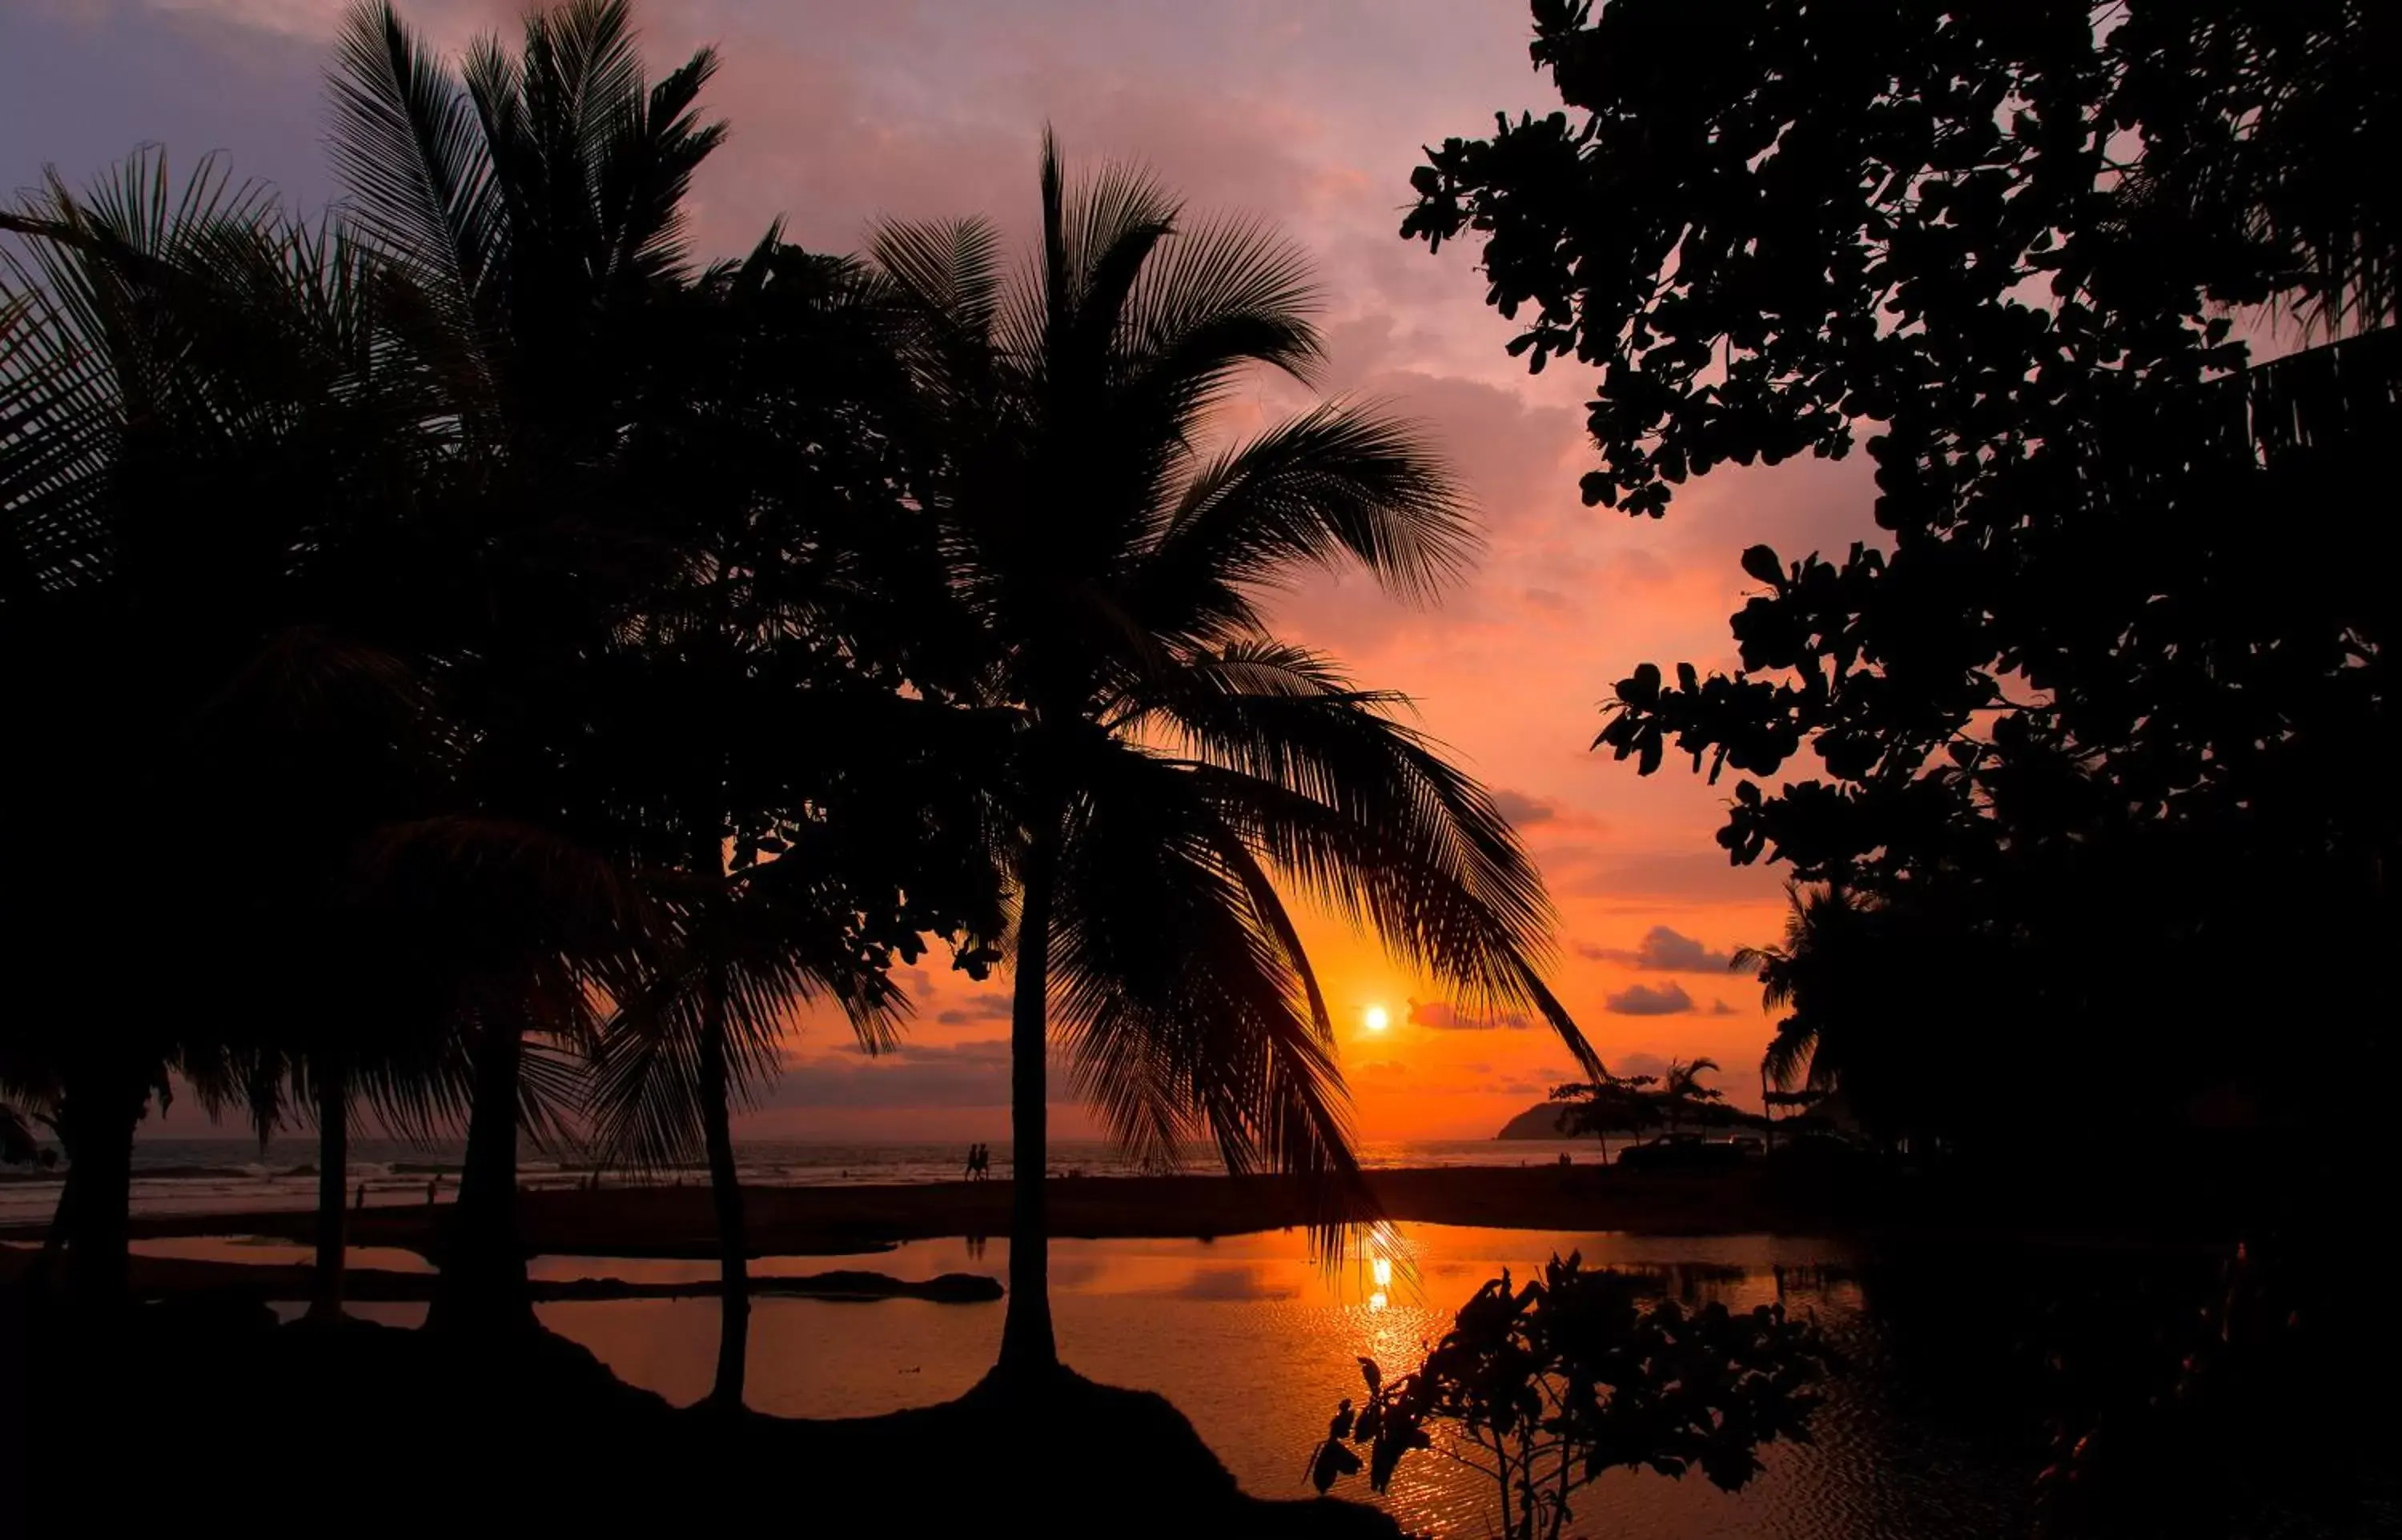 Sea view, Sunrise/Sunset in Costa Rica Surf Camp by SUPERbrand